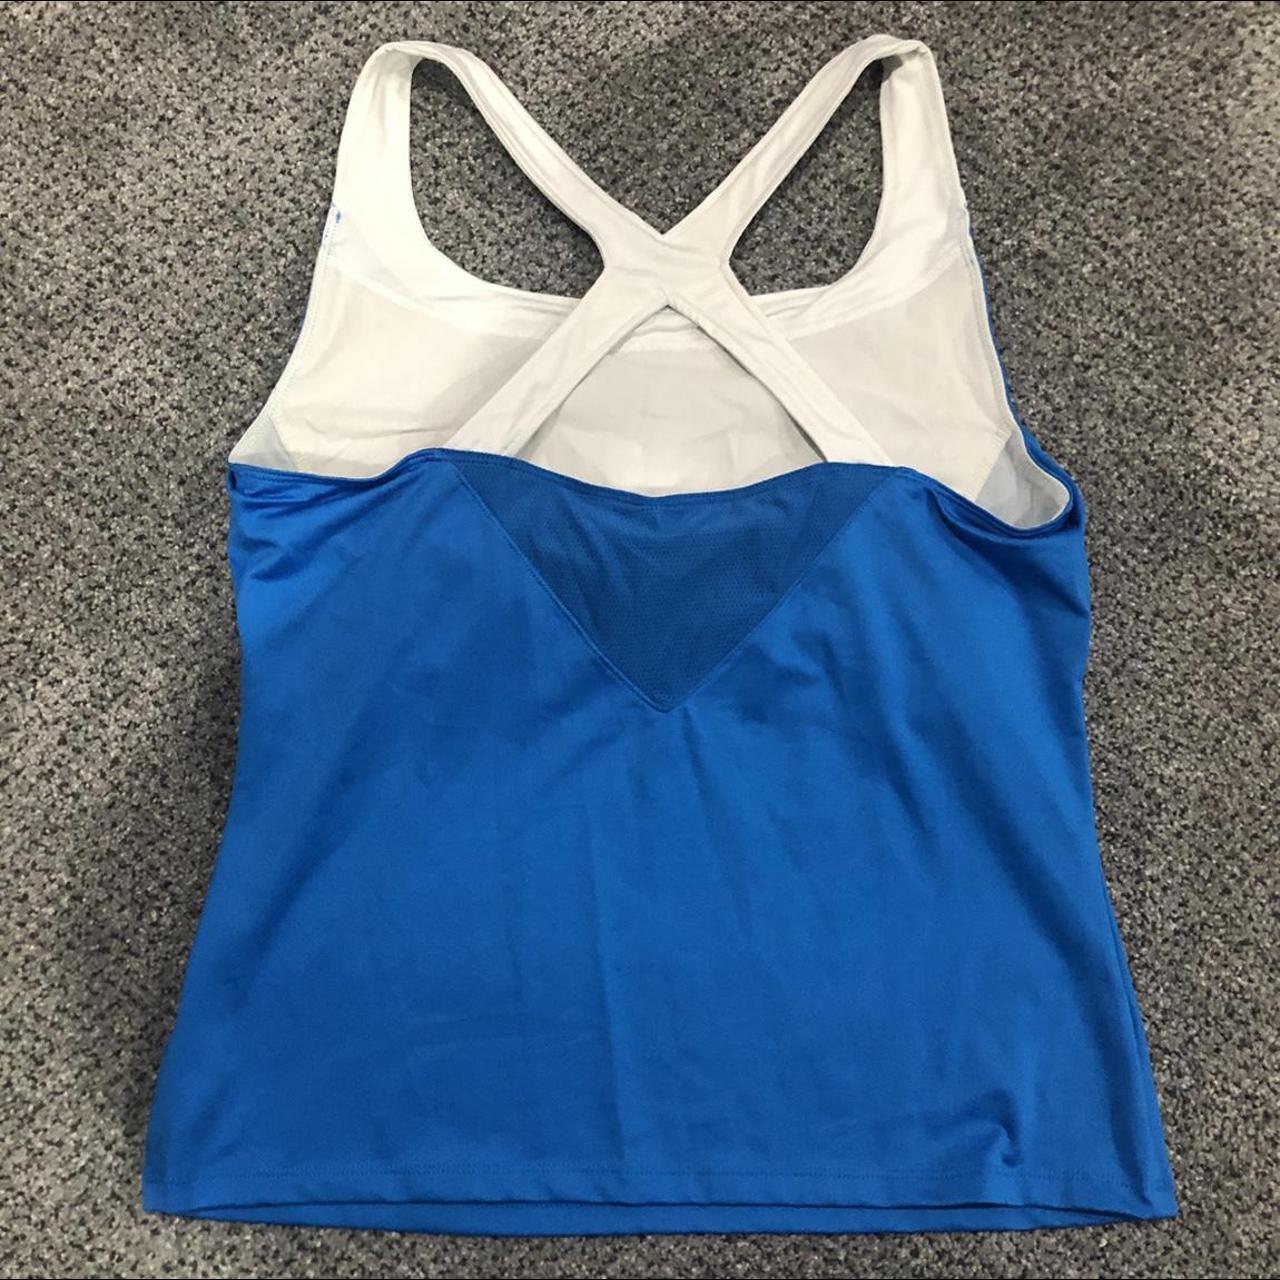 Product Image 3 - K-Swiss Blue Tank Top

Good Condition